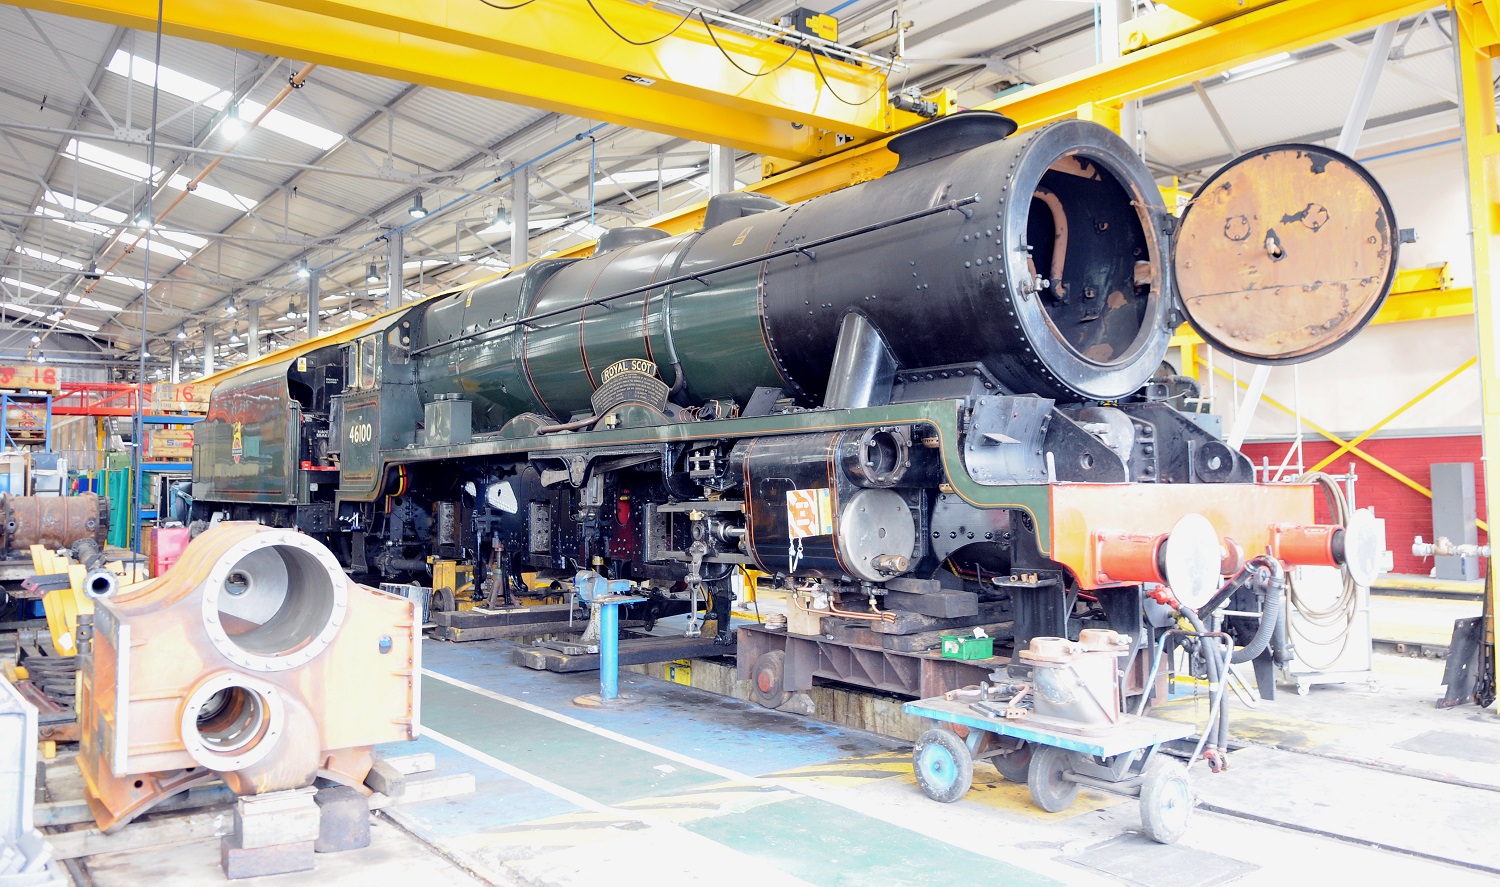 Royal Scot 46100, currently undergoing maintenance